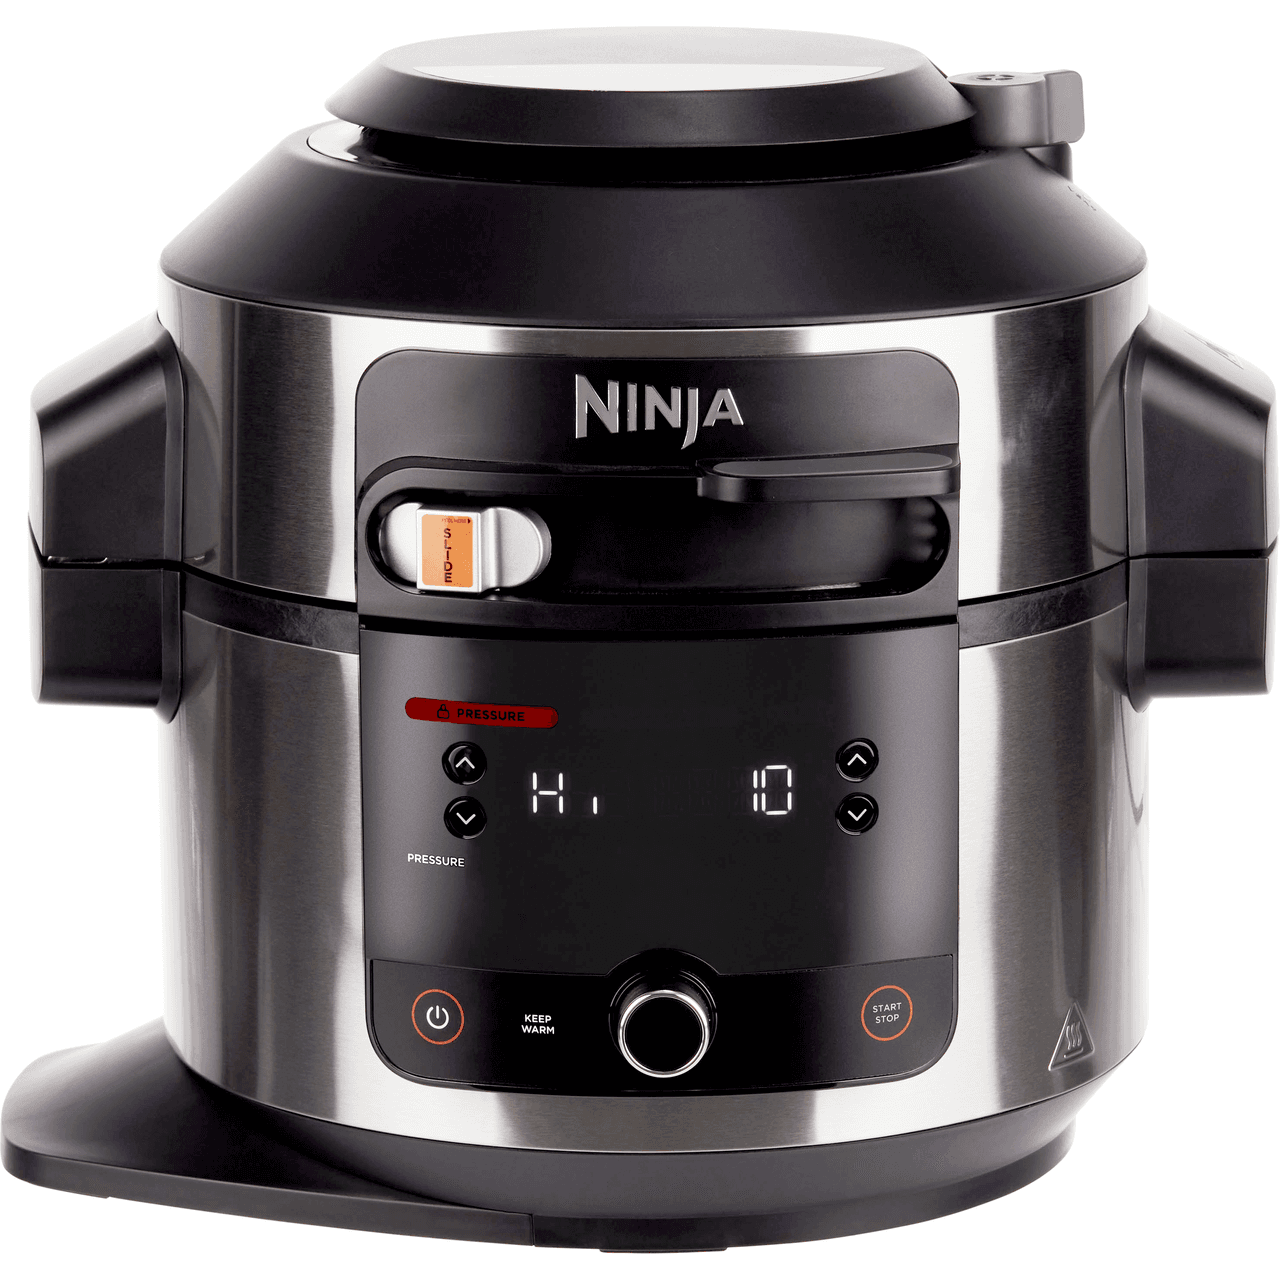 Ninja SmartLid 11-in-1 Electric Cooker (6 L) with Air Fryer